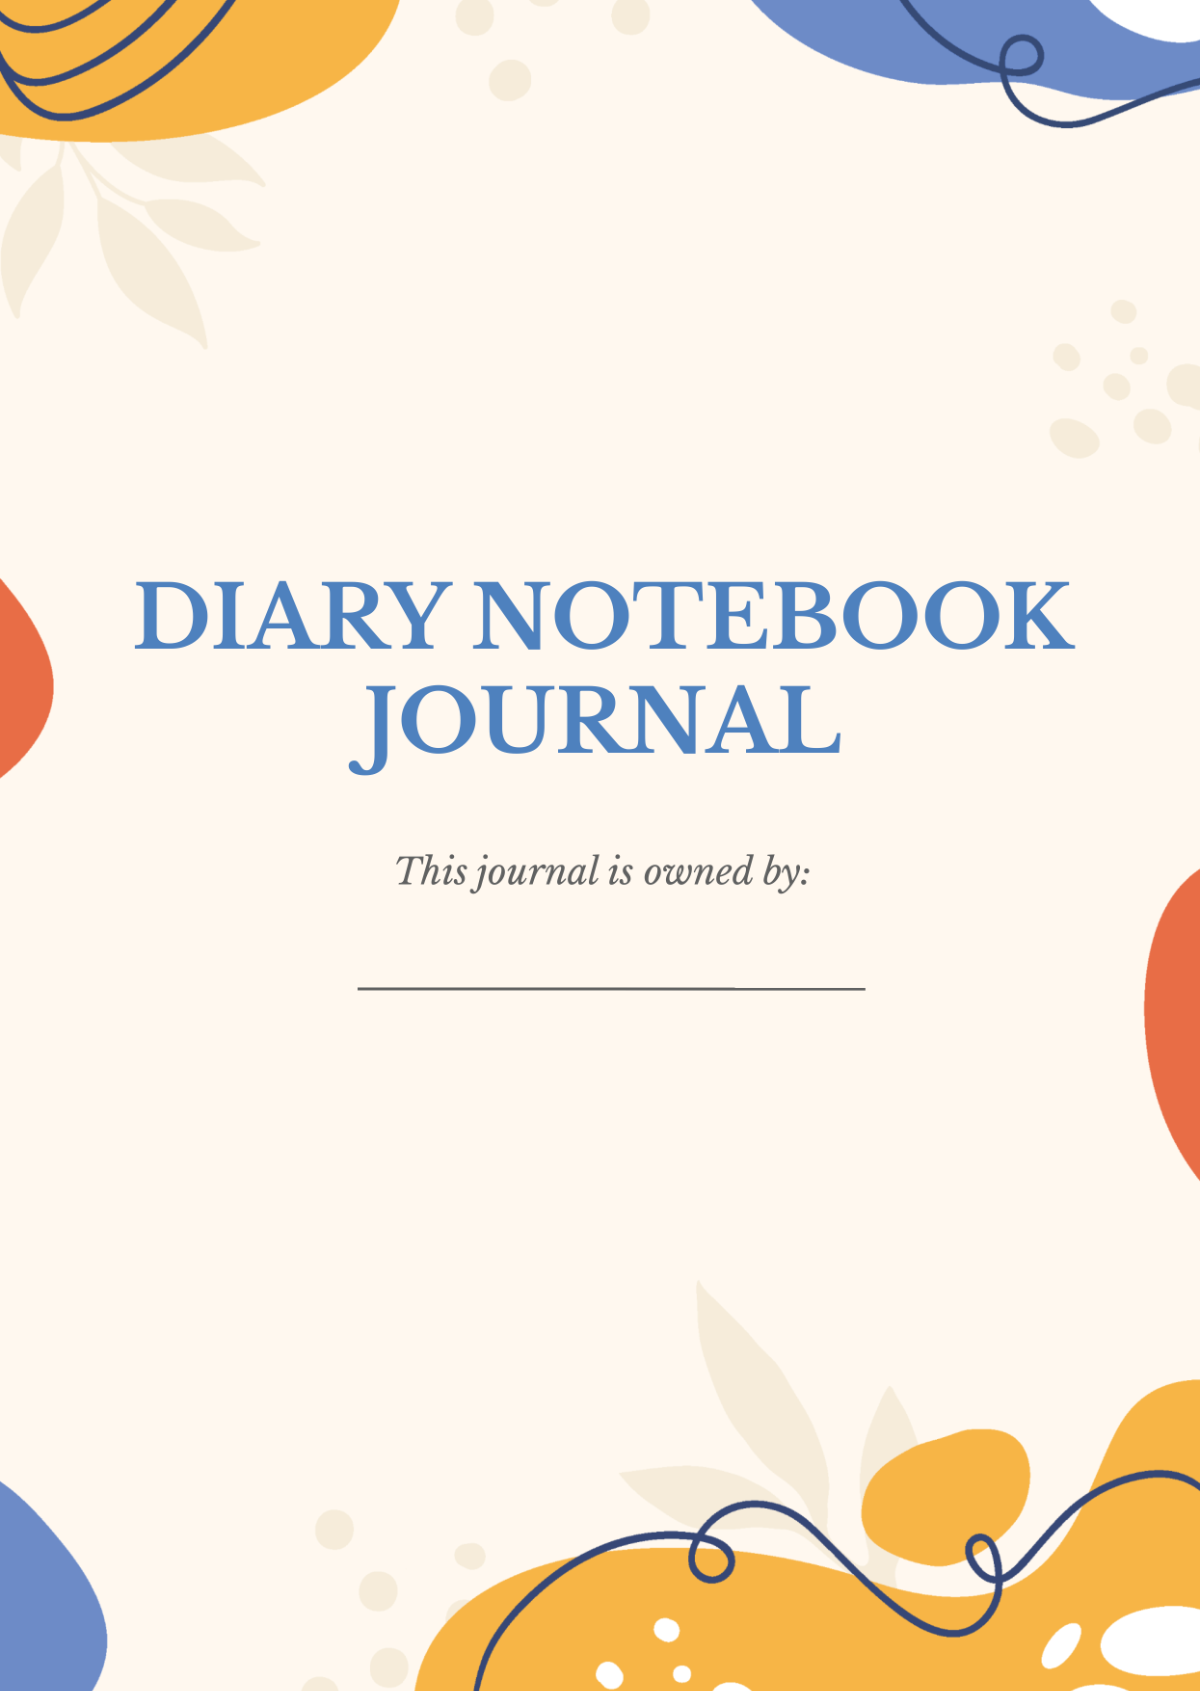 Diary Notebook Journals Template